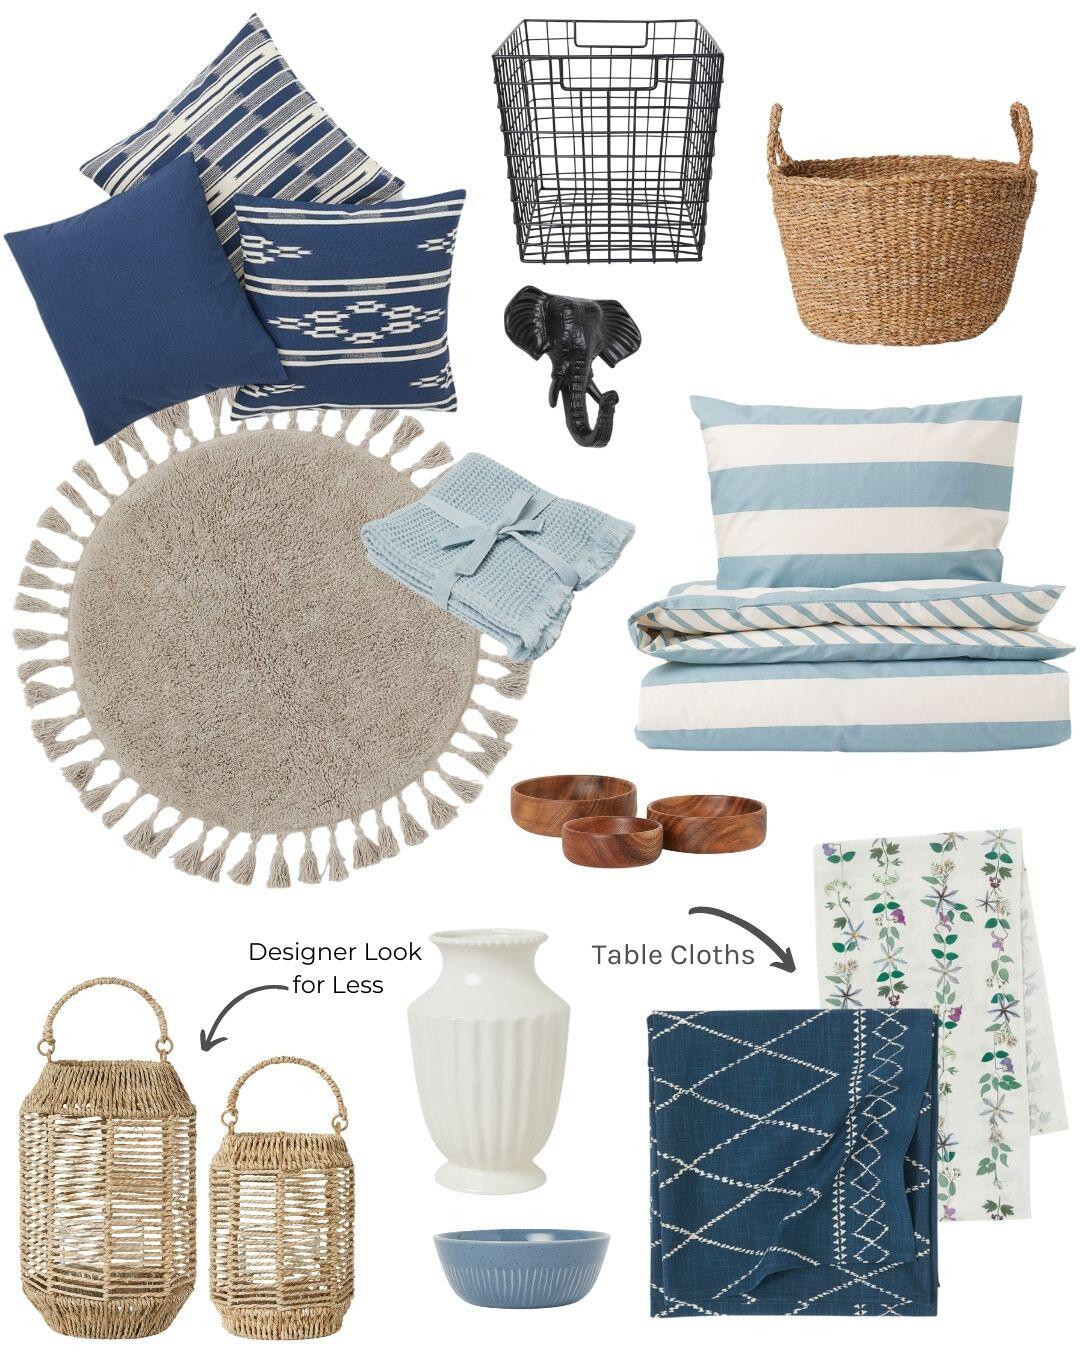 Check out the latest Home items at H&M Home. They have great baskets, linens, pillow cases, table decor and more. At great prices!